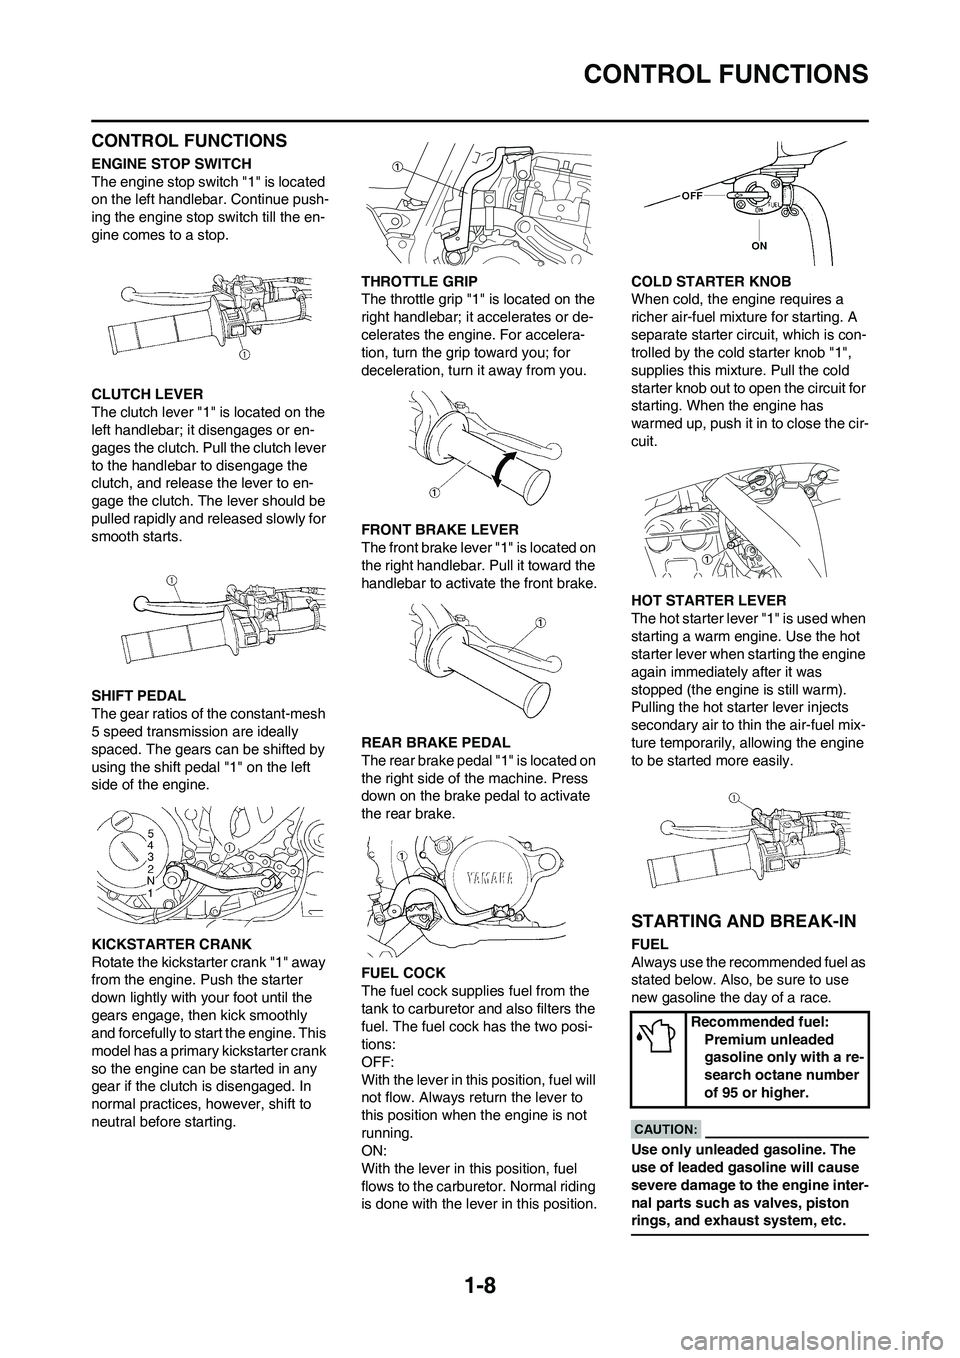 YAMAHA YZ450F 2008  Owners Manual 1-8
CONTROL FUNCTIONS
CONTROL FUNCTIONS
ENGINE STOP SWITCH
The engine stop switch "1" is located 
on the left handlebar. Continue push-
ing the engine stop switch till the en-
gine comes to a stop.
CL